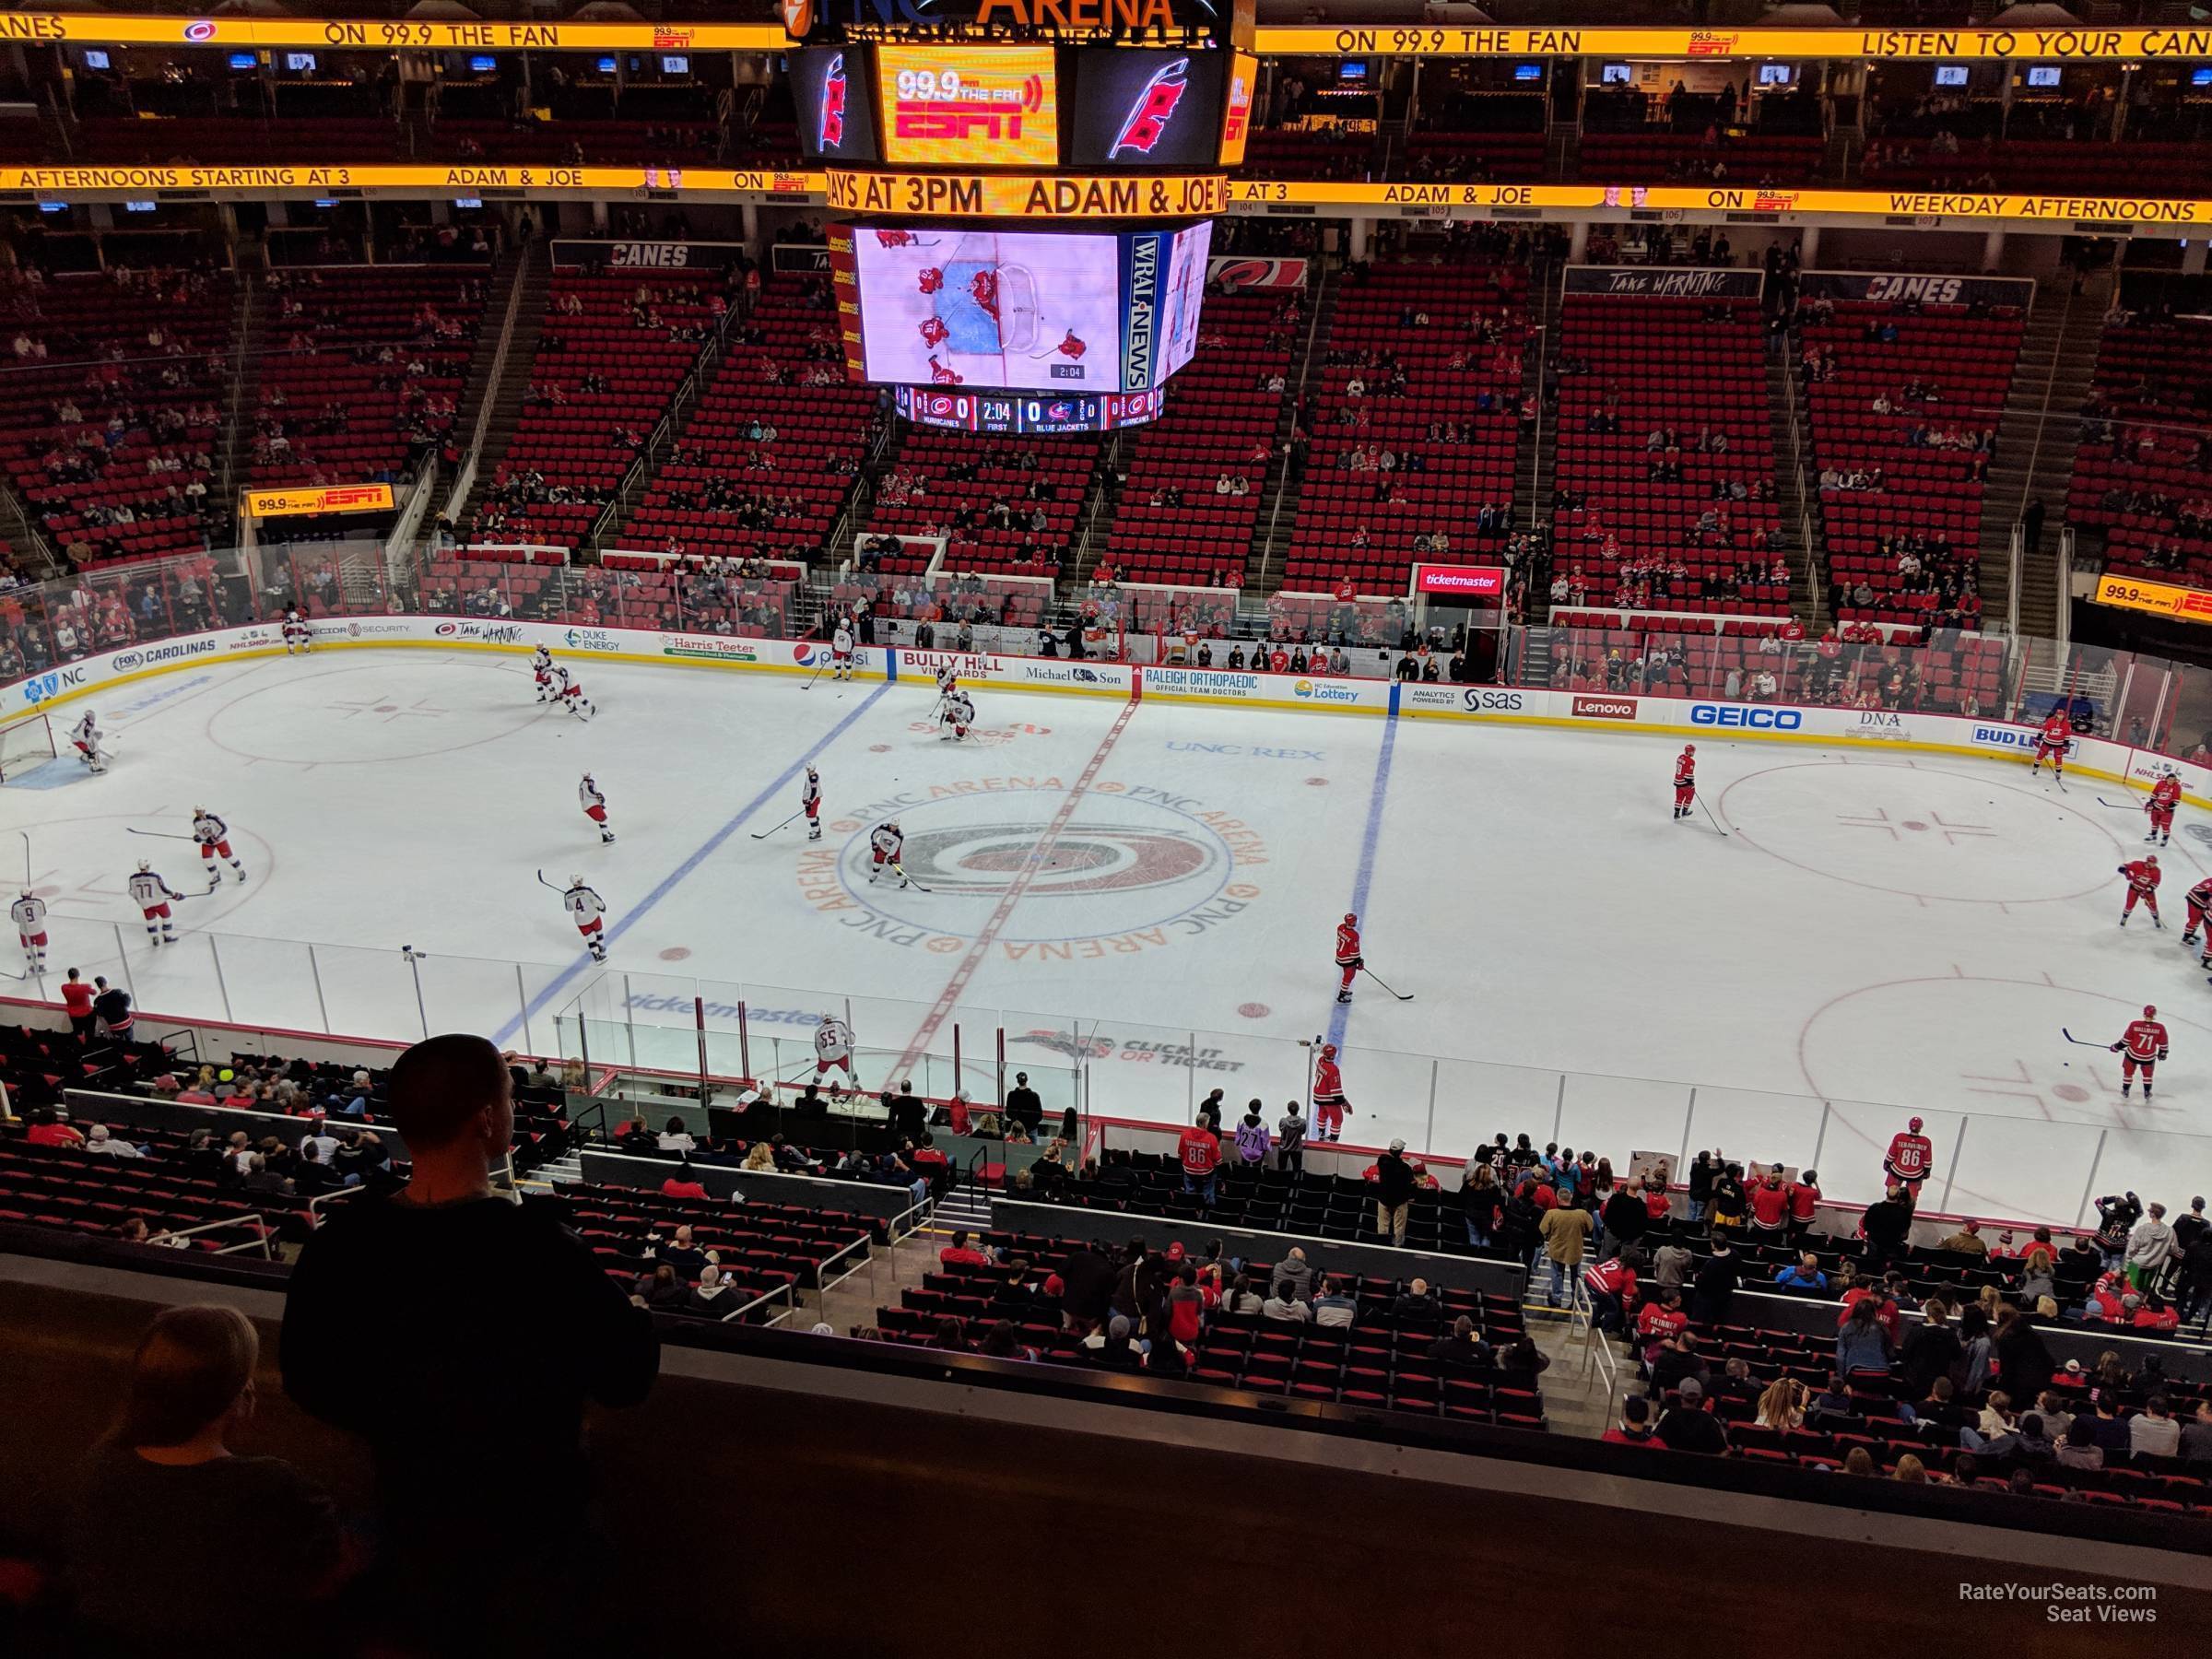 section 219, row t seat view  for hockey - pnc arena